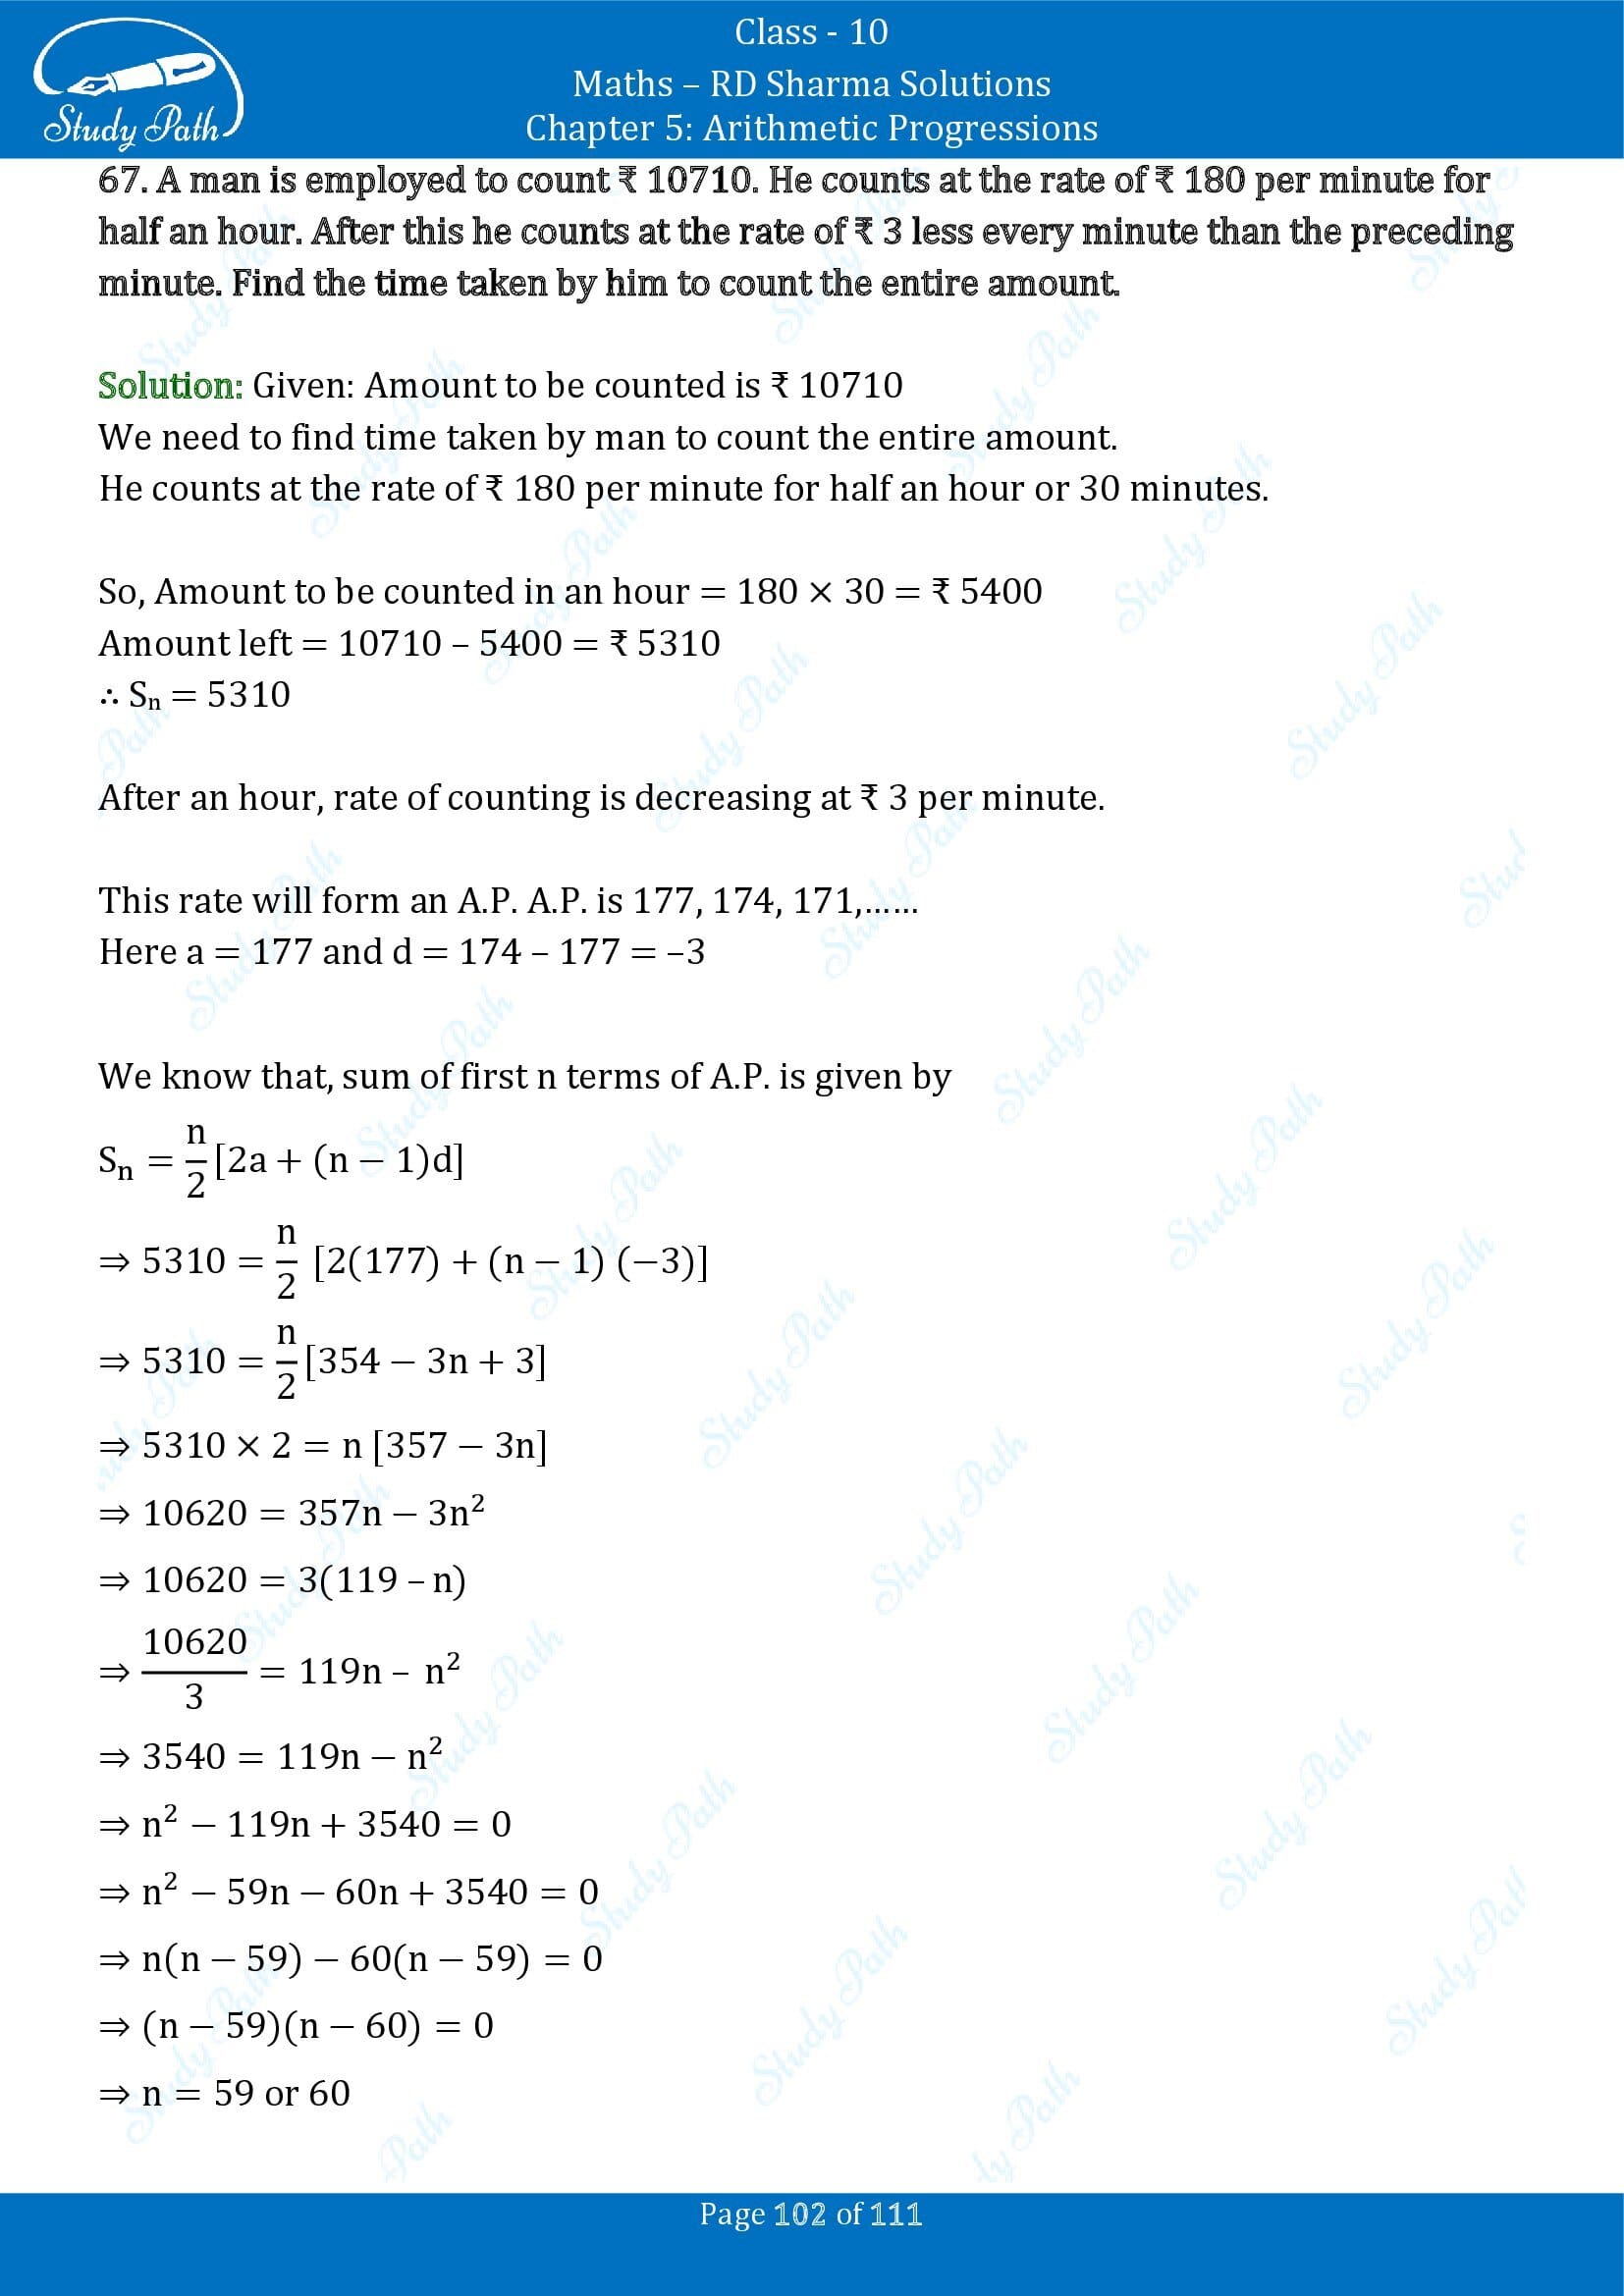 RD Sharma Solutions Class 10 Chapter 5 Arithmetic Progressions Exercise 5.6 00102